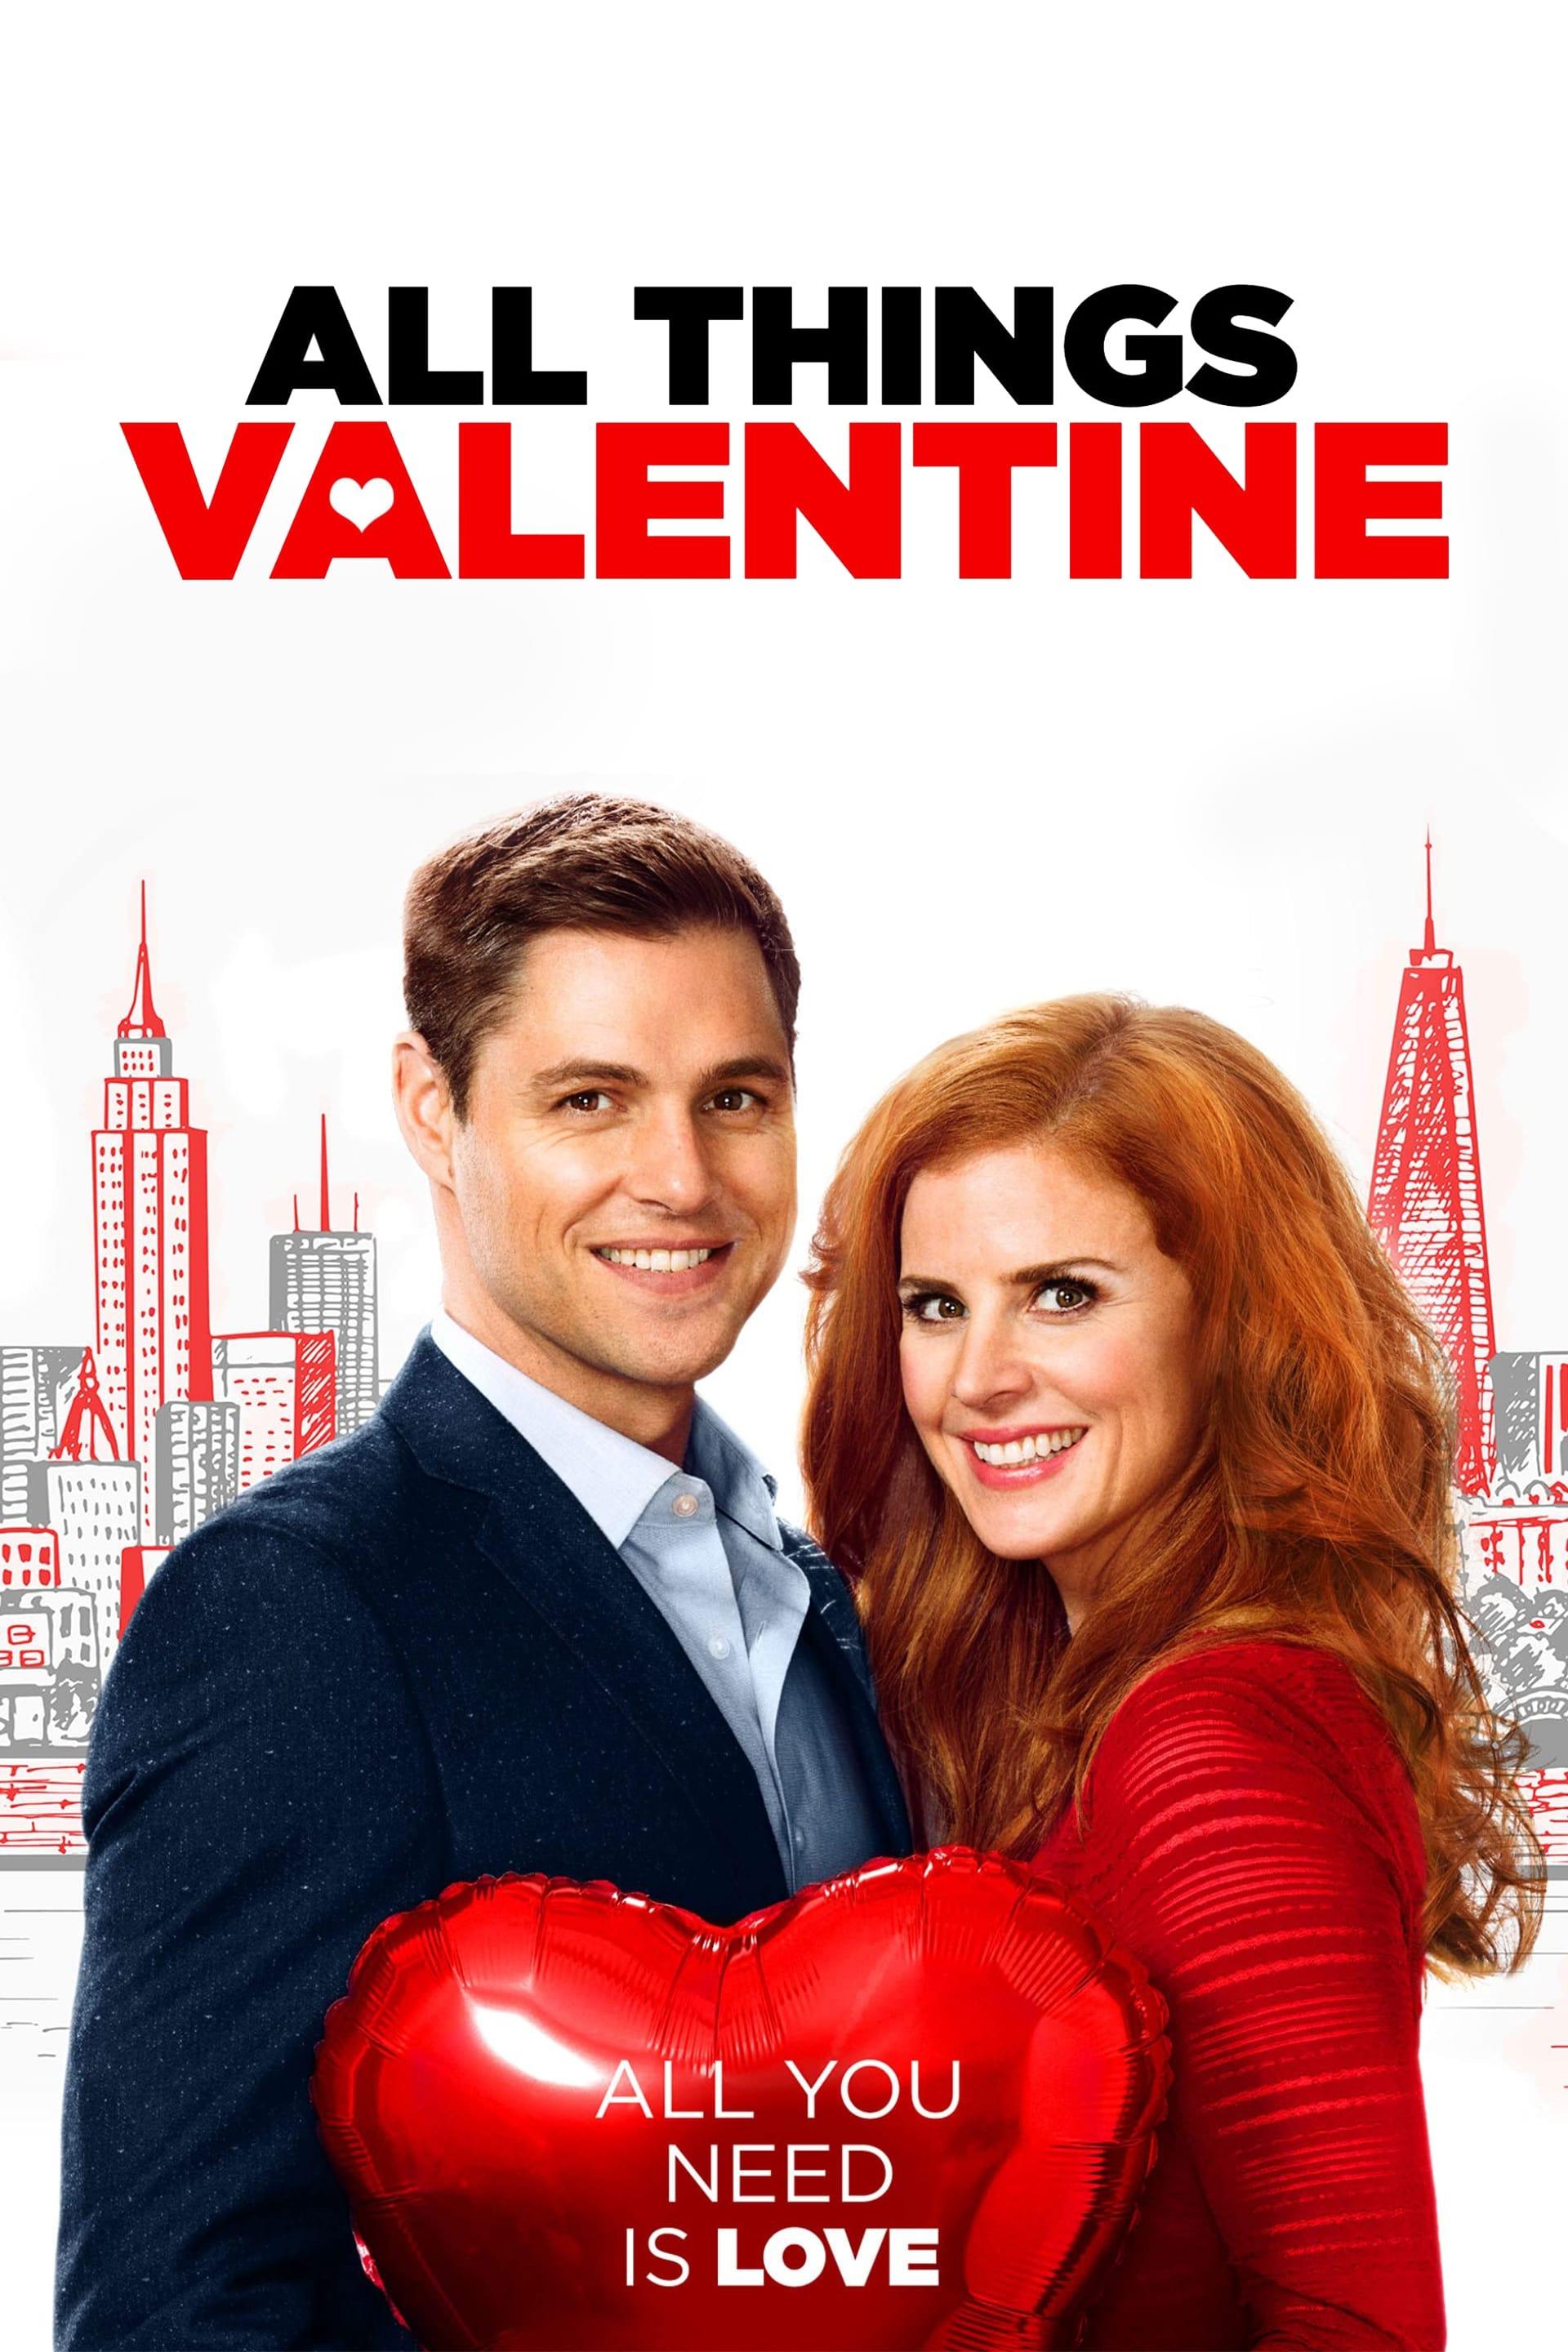 All Things Valentine poster